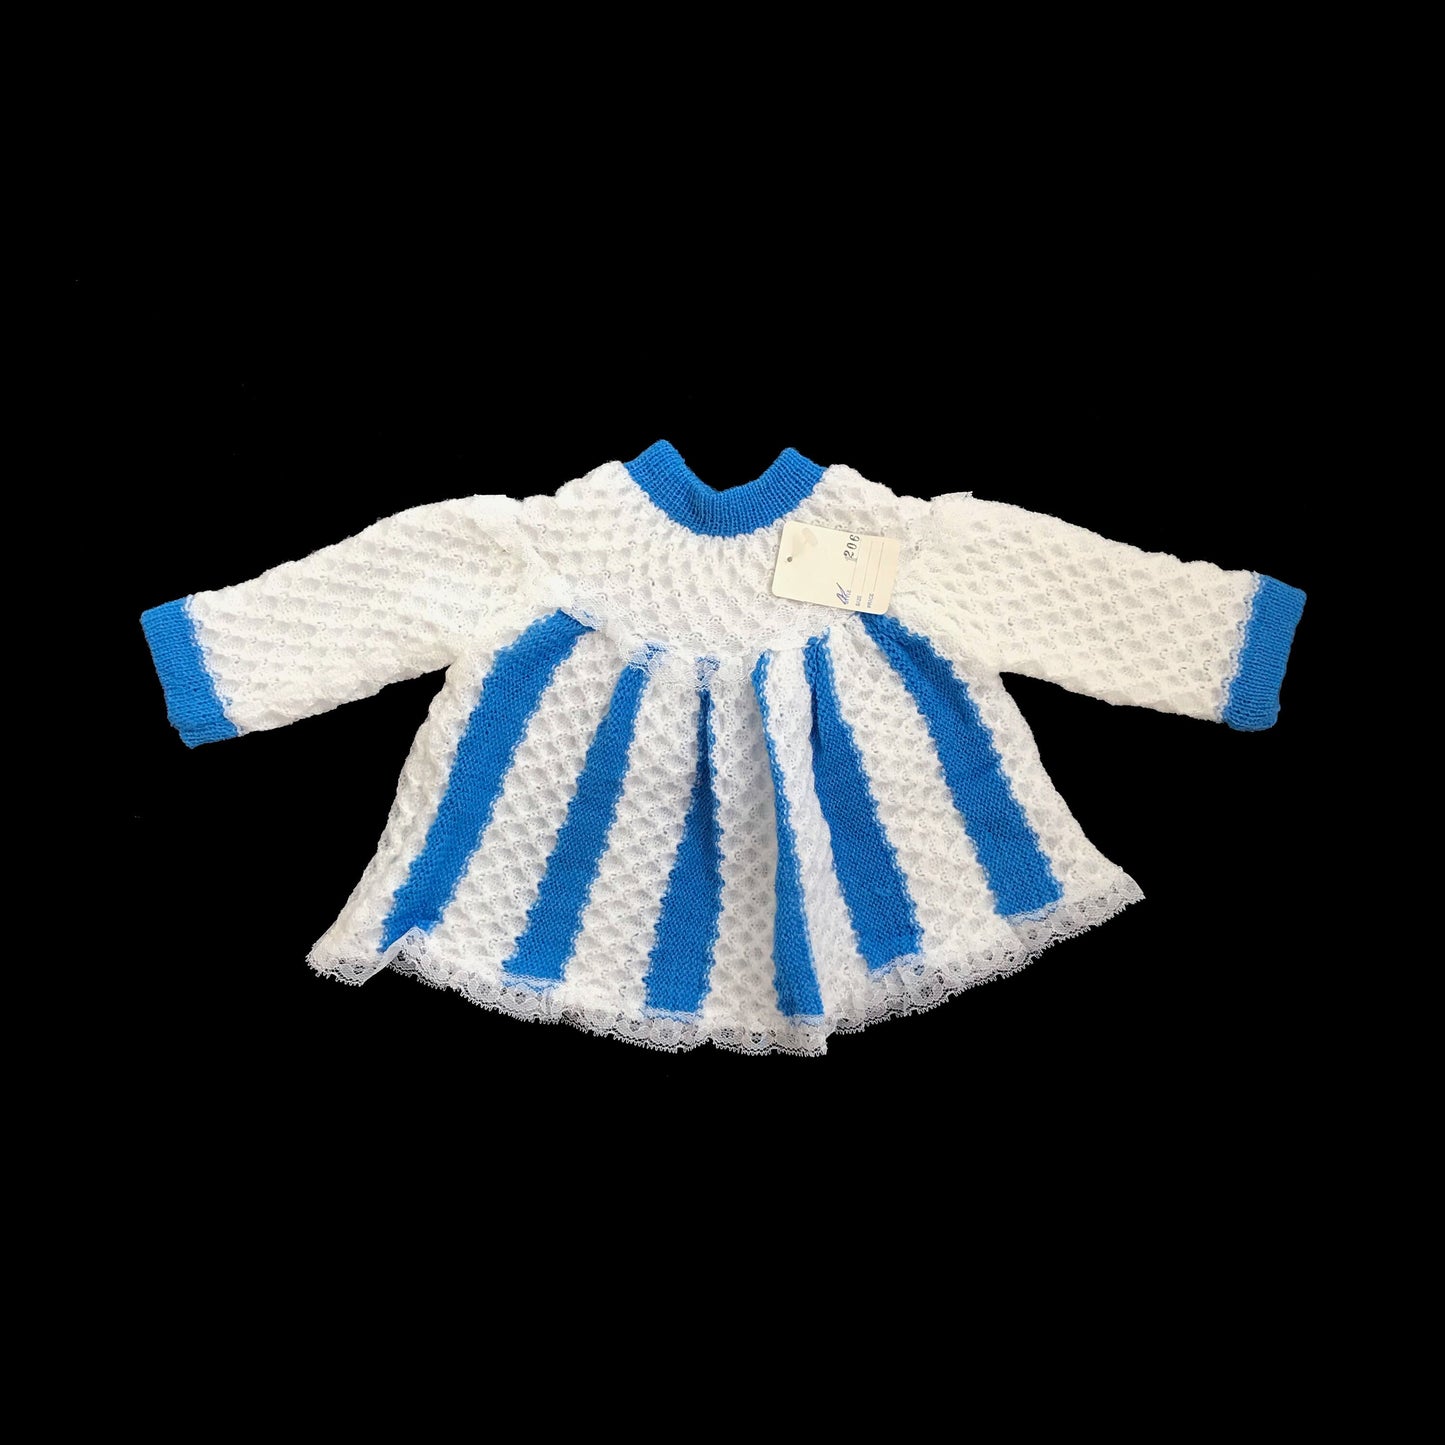 Vintage 70's Stripy White/Blue Knitted Dress  0-3 Months